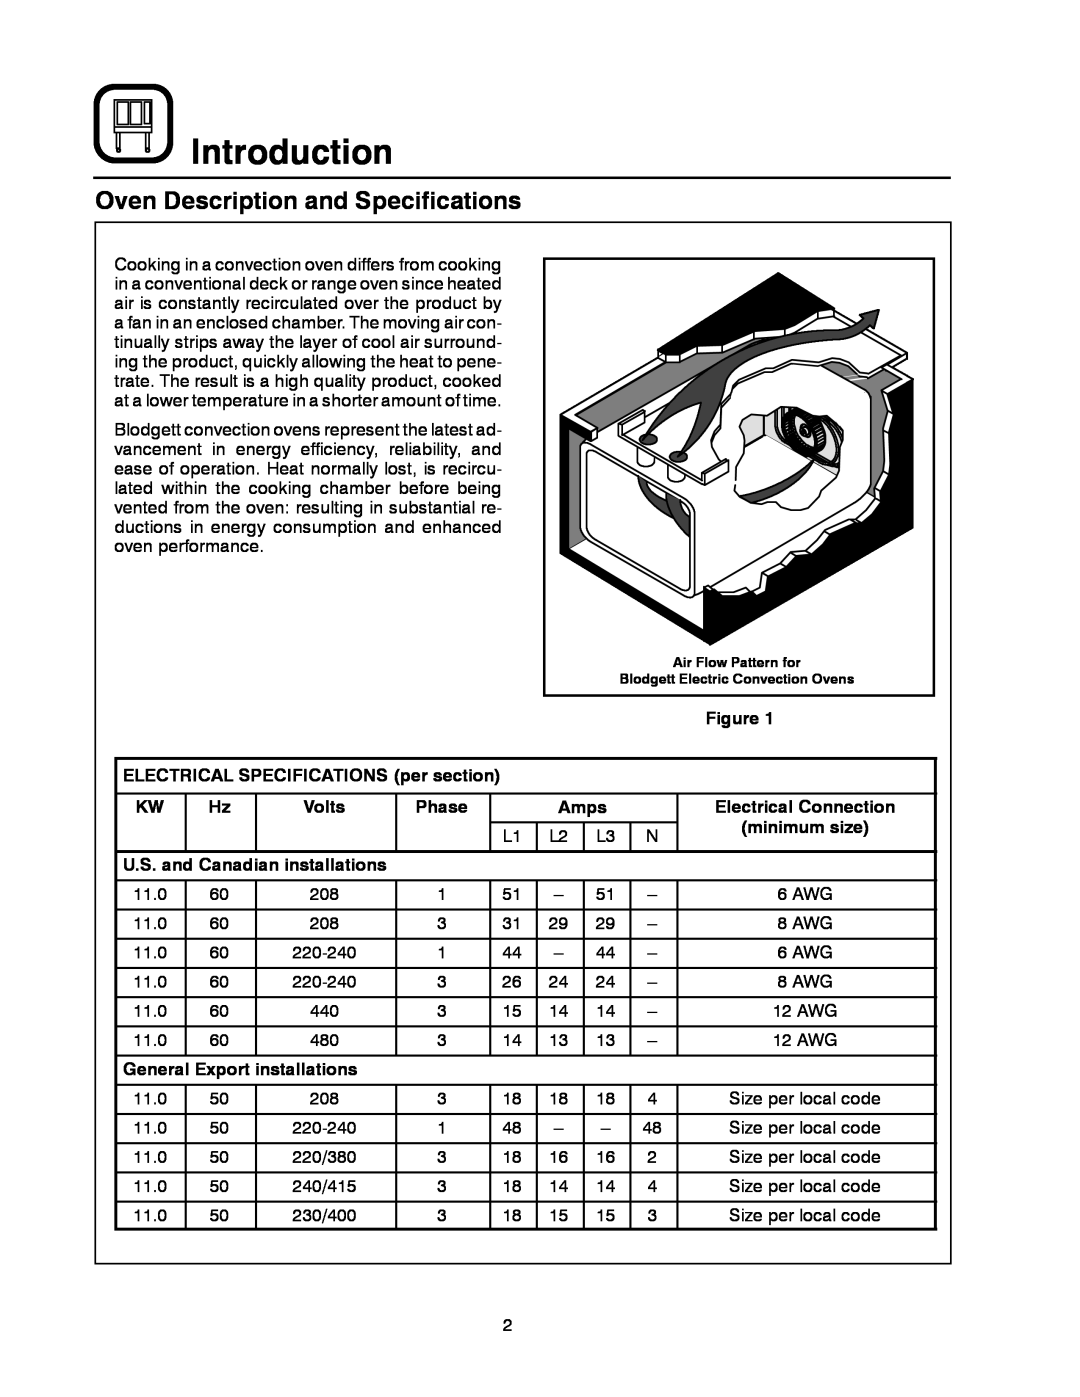 Blodgett MARK V manual Introduction, ELECTRICAL SPECIFICATIONS per section, Volts, Phase, Amps, Electrical Connection 